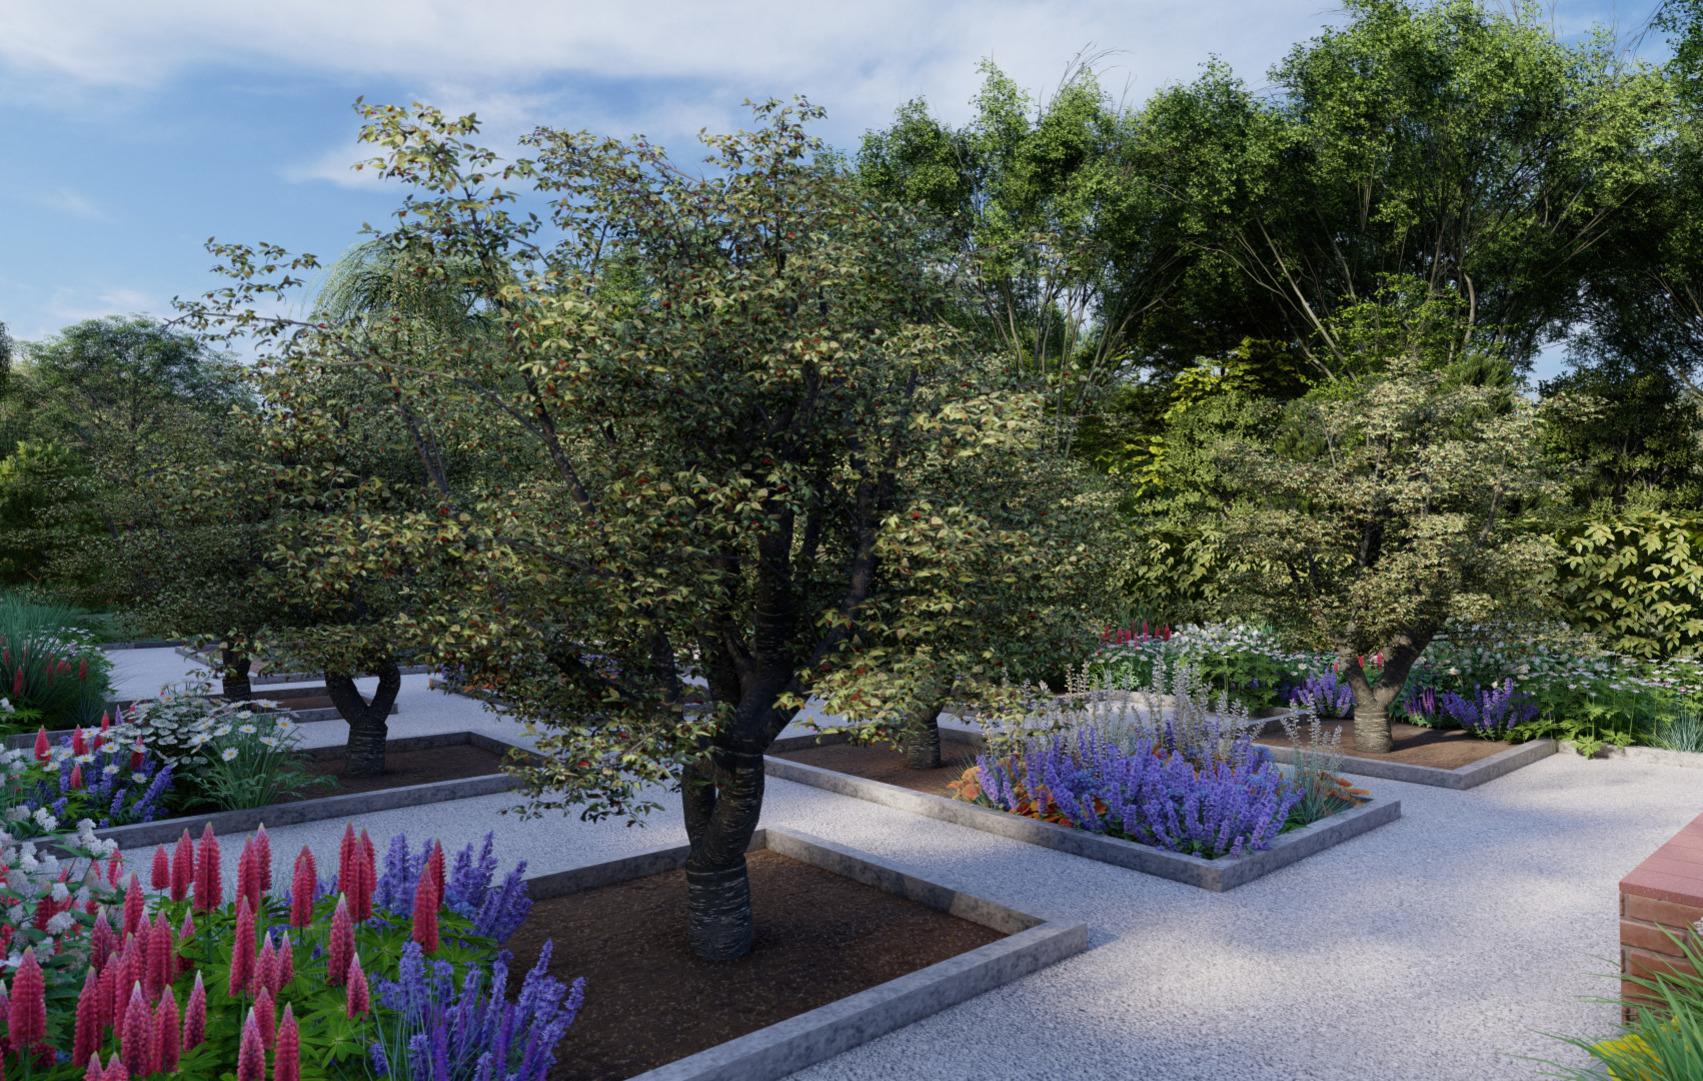 A formal and stylised layout to the Orchard along with pockets of companion/pollinator friendly planting